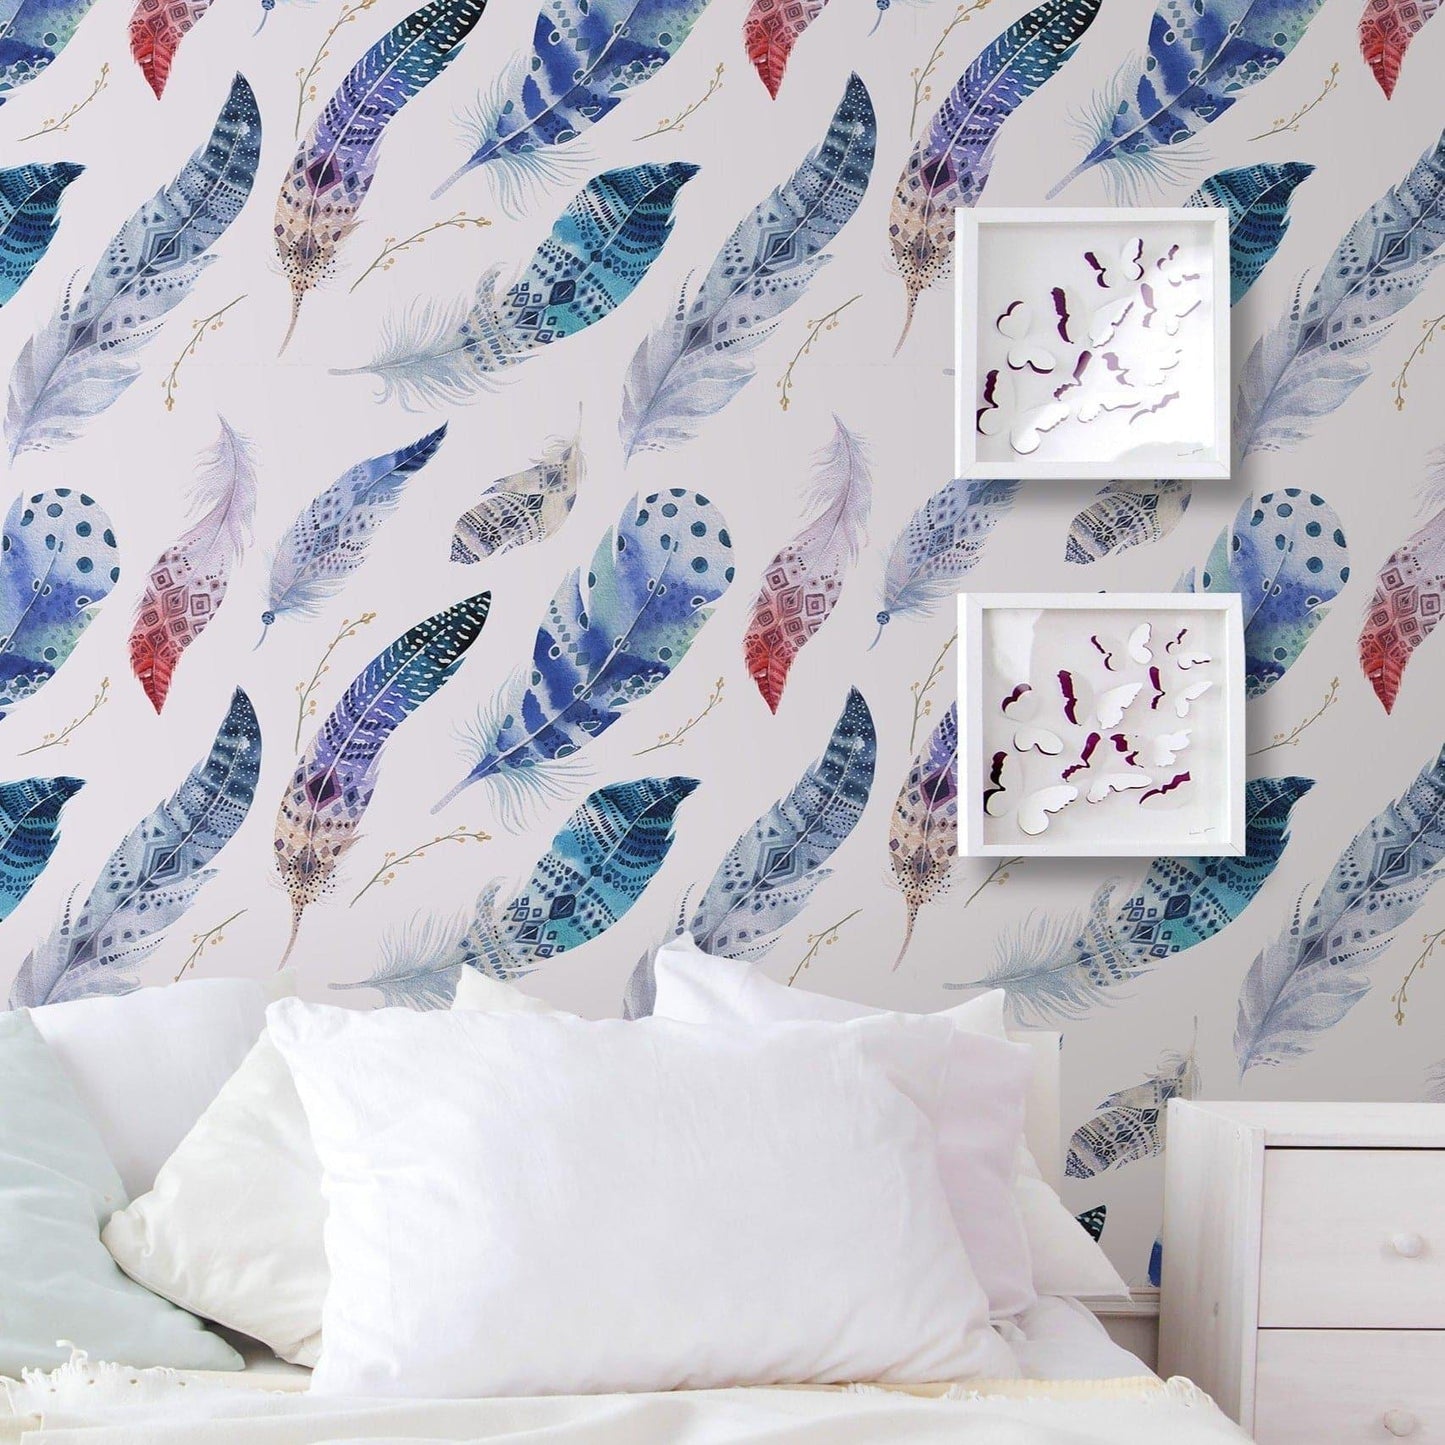 Watercolor Indian Feathers Removable Wallpaper Watercolor Indian Feathers Removable Wallpaper Watercolor Indian Feathers Removable Wallpaper 